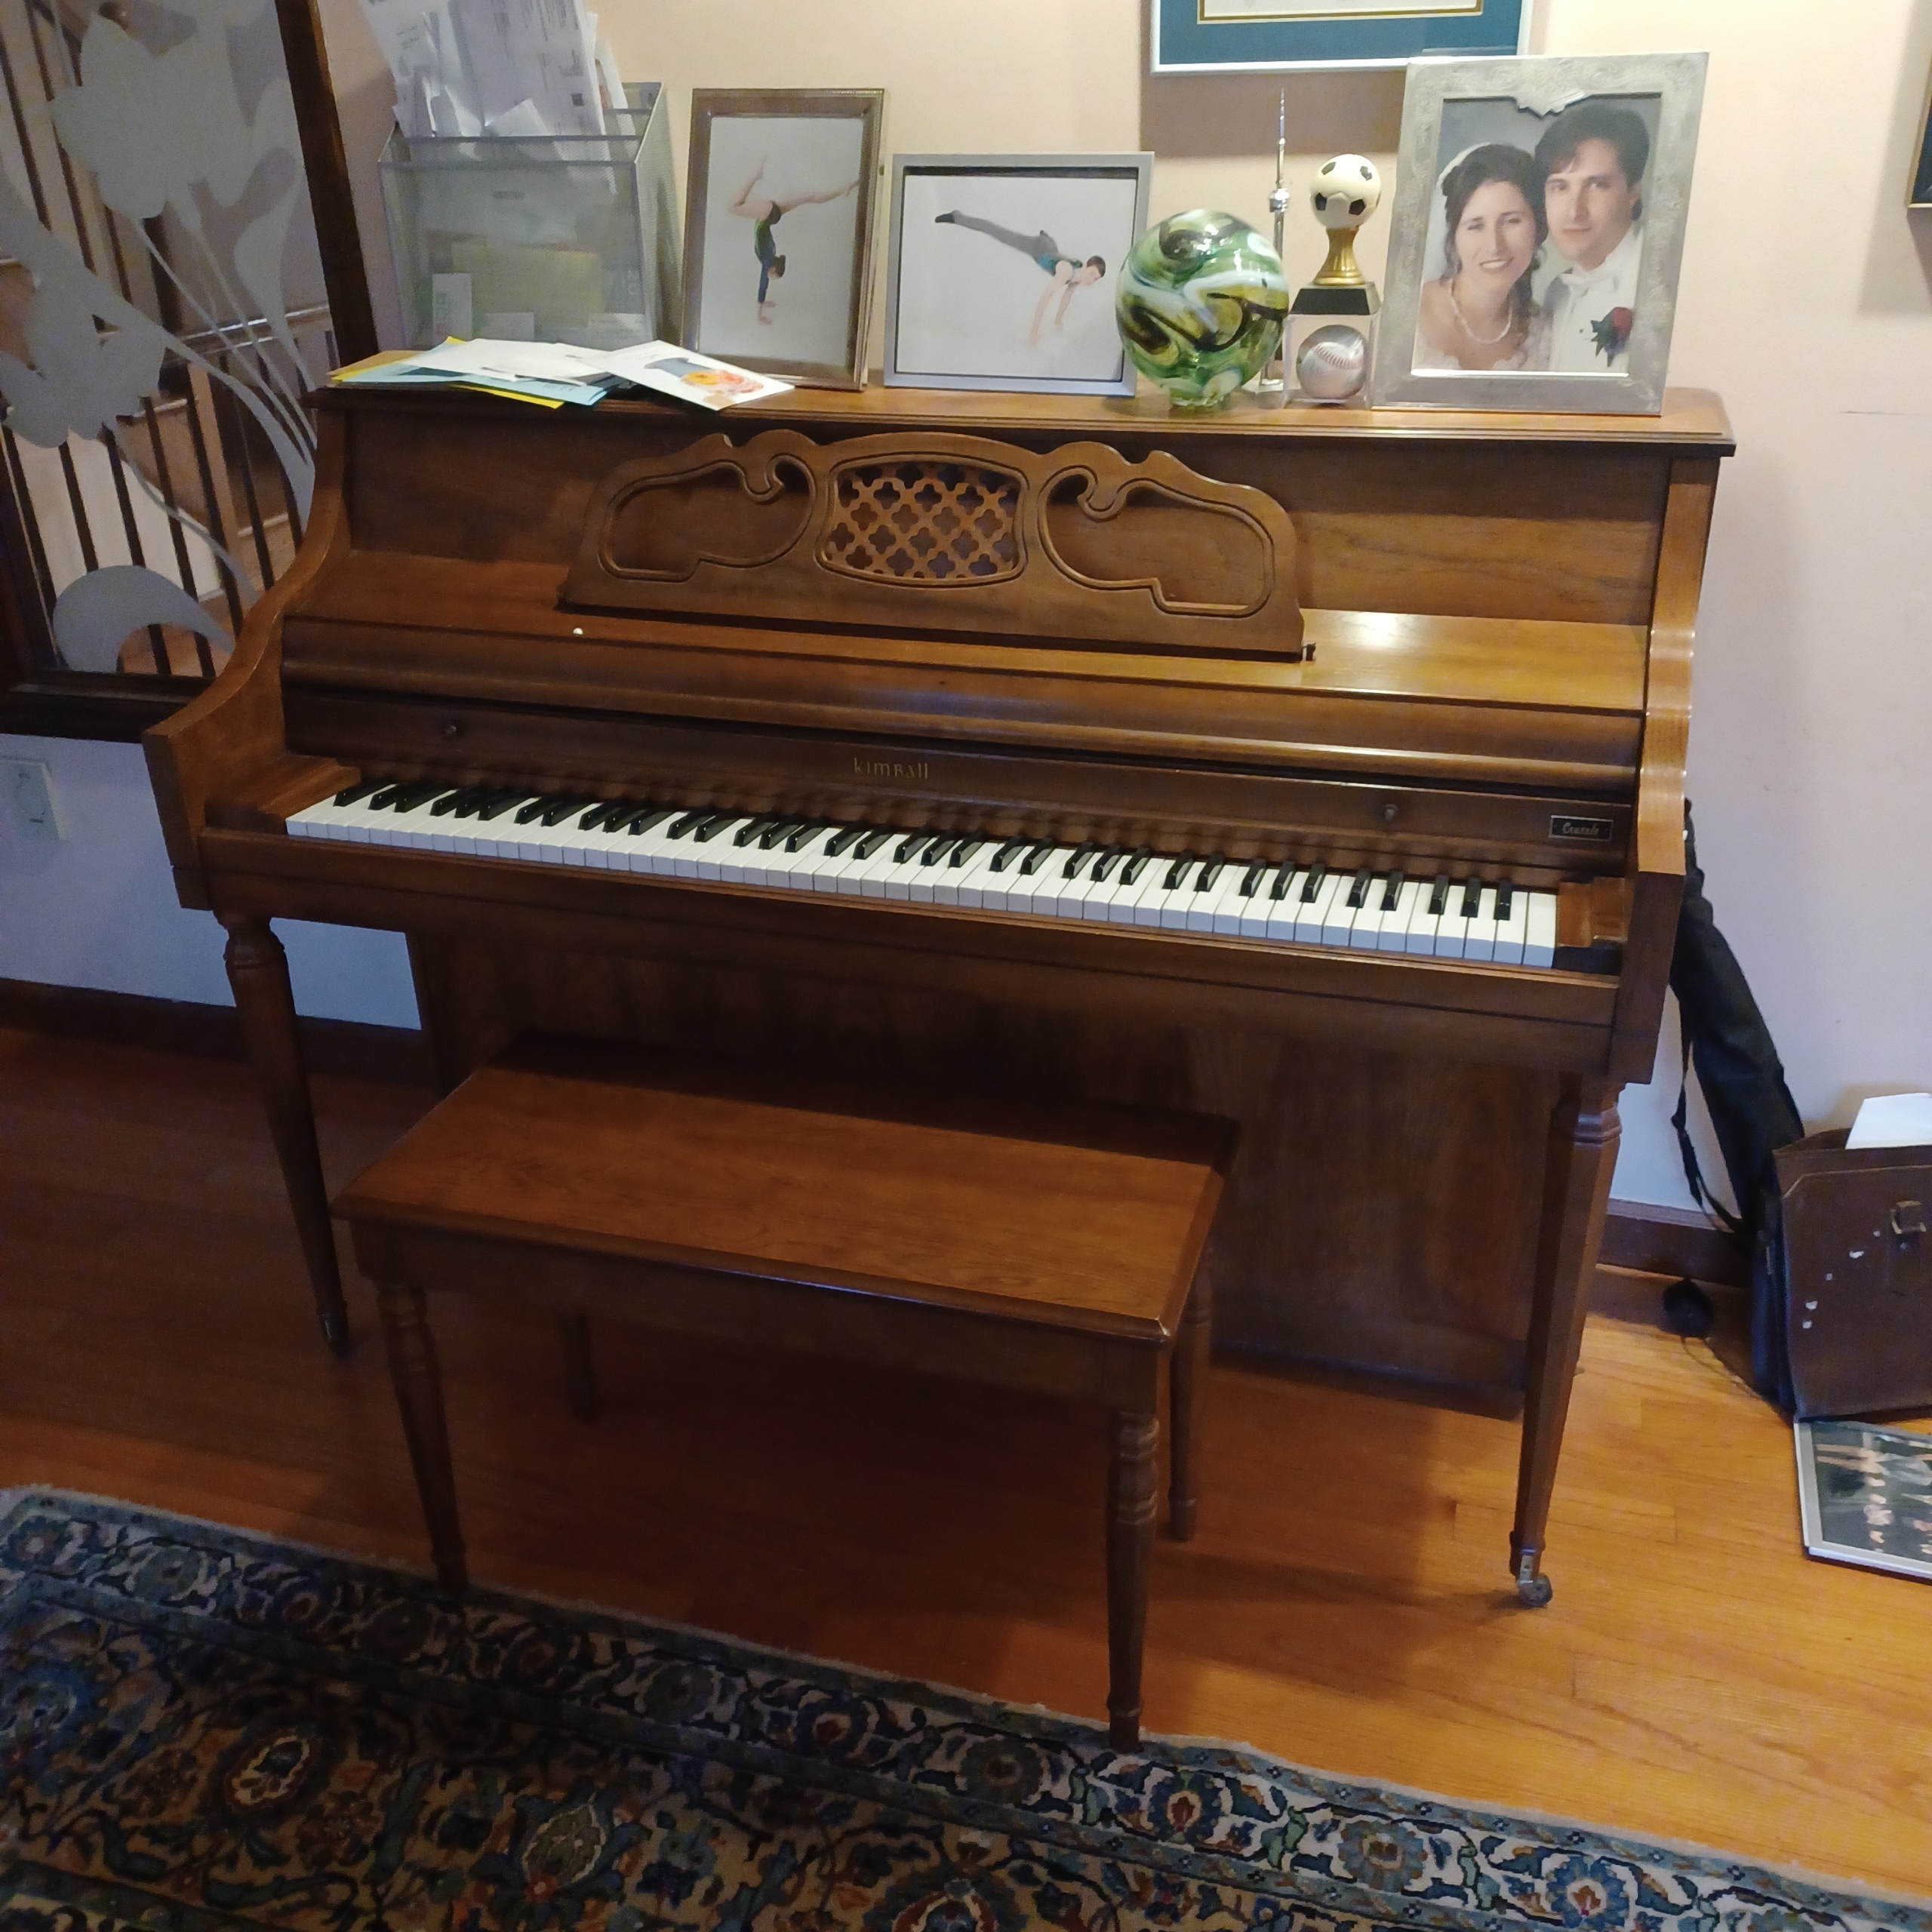 Kimball upright in excellent condition